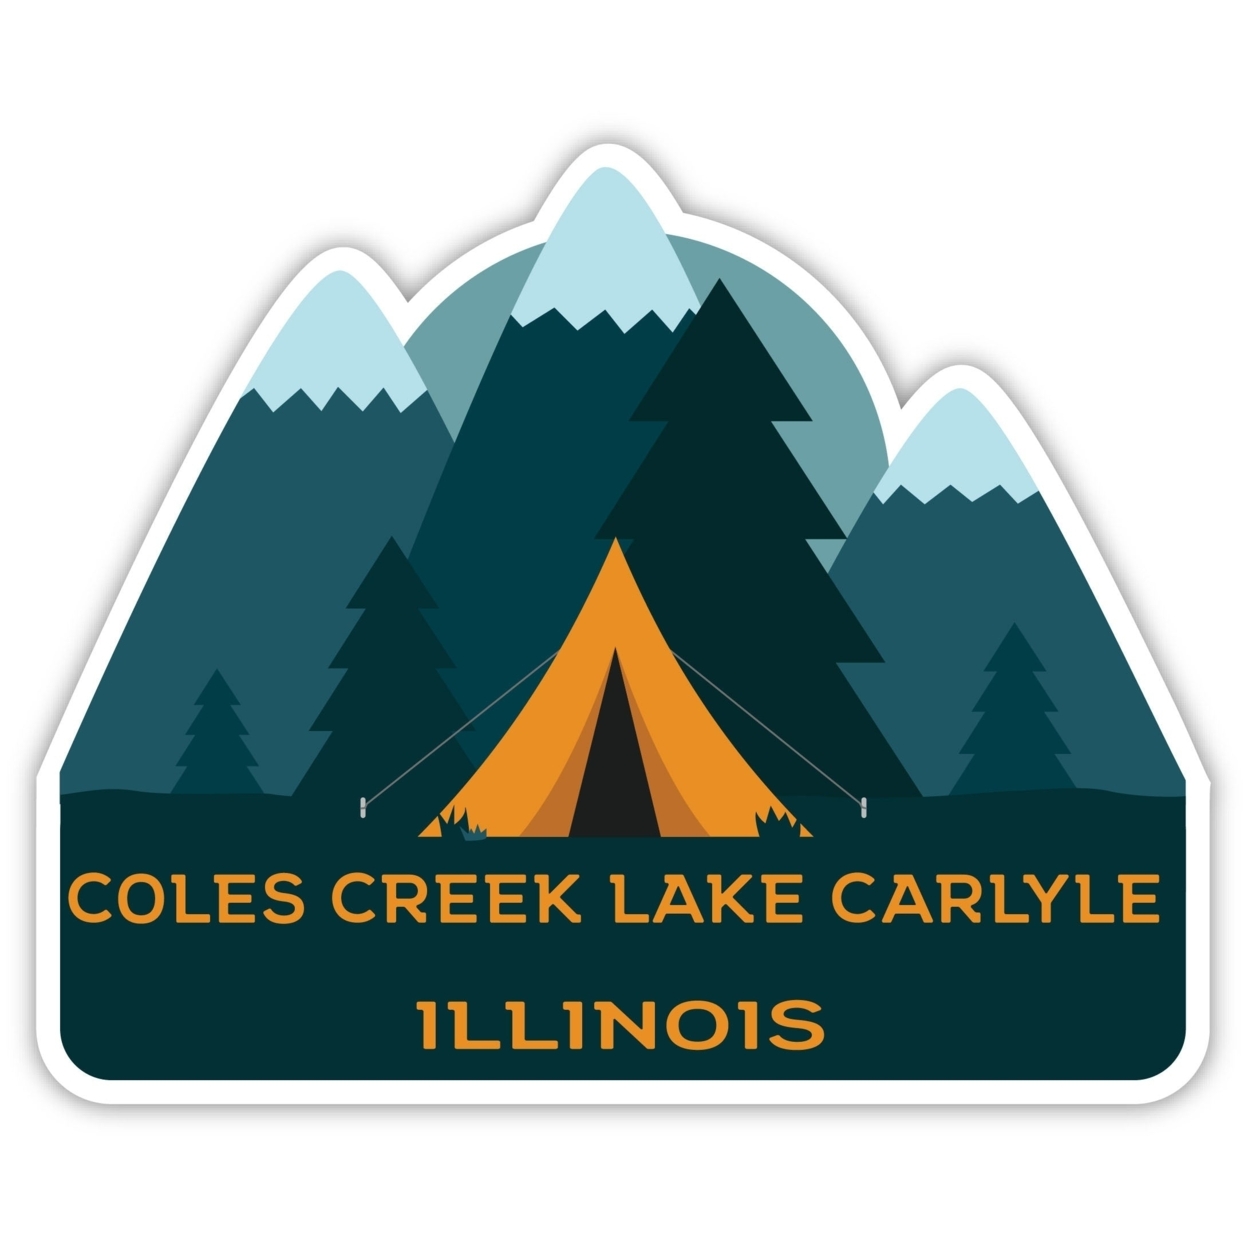 Coles Creek Lake Carlyle Illinois Souvenir Decorative Stickers (Choose Theme And Size) - 4-Pack, 4-Inch, Tent